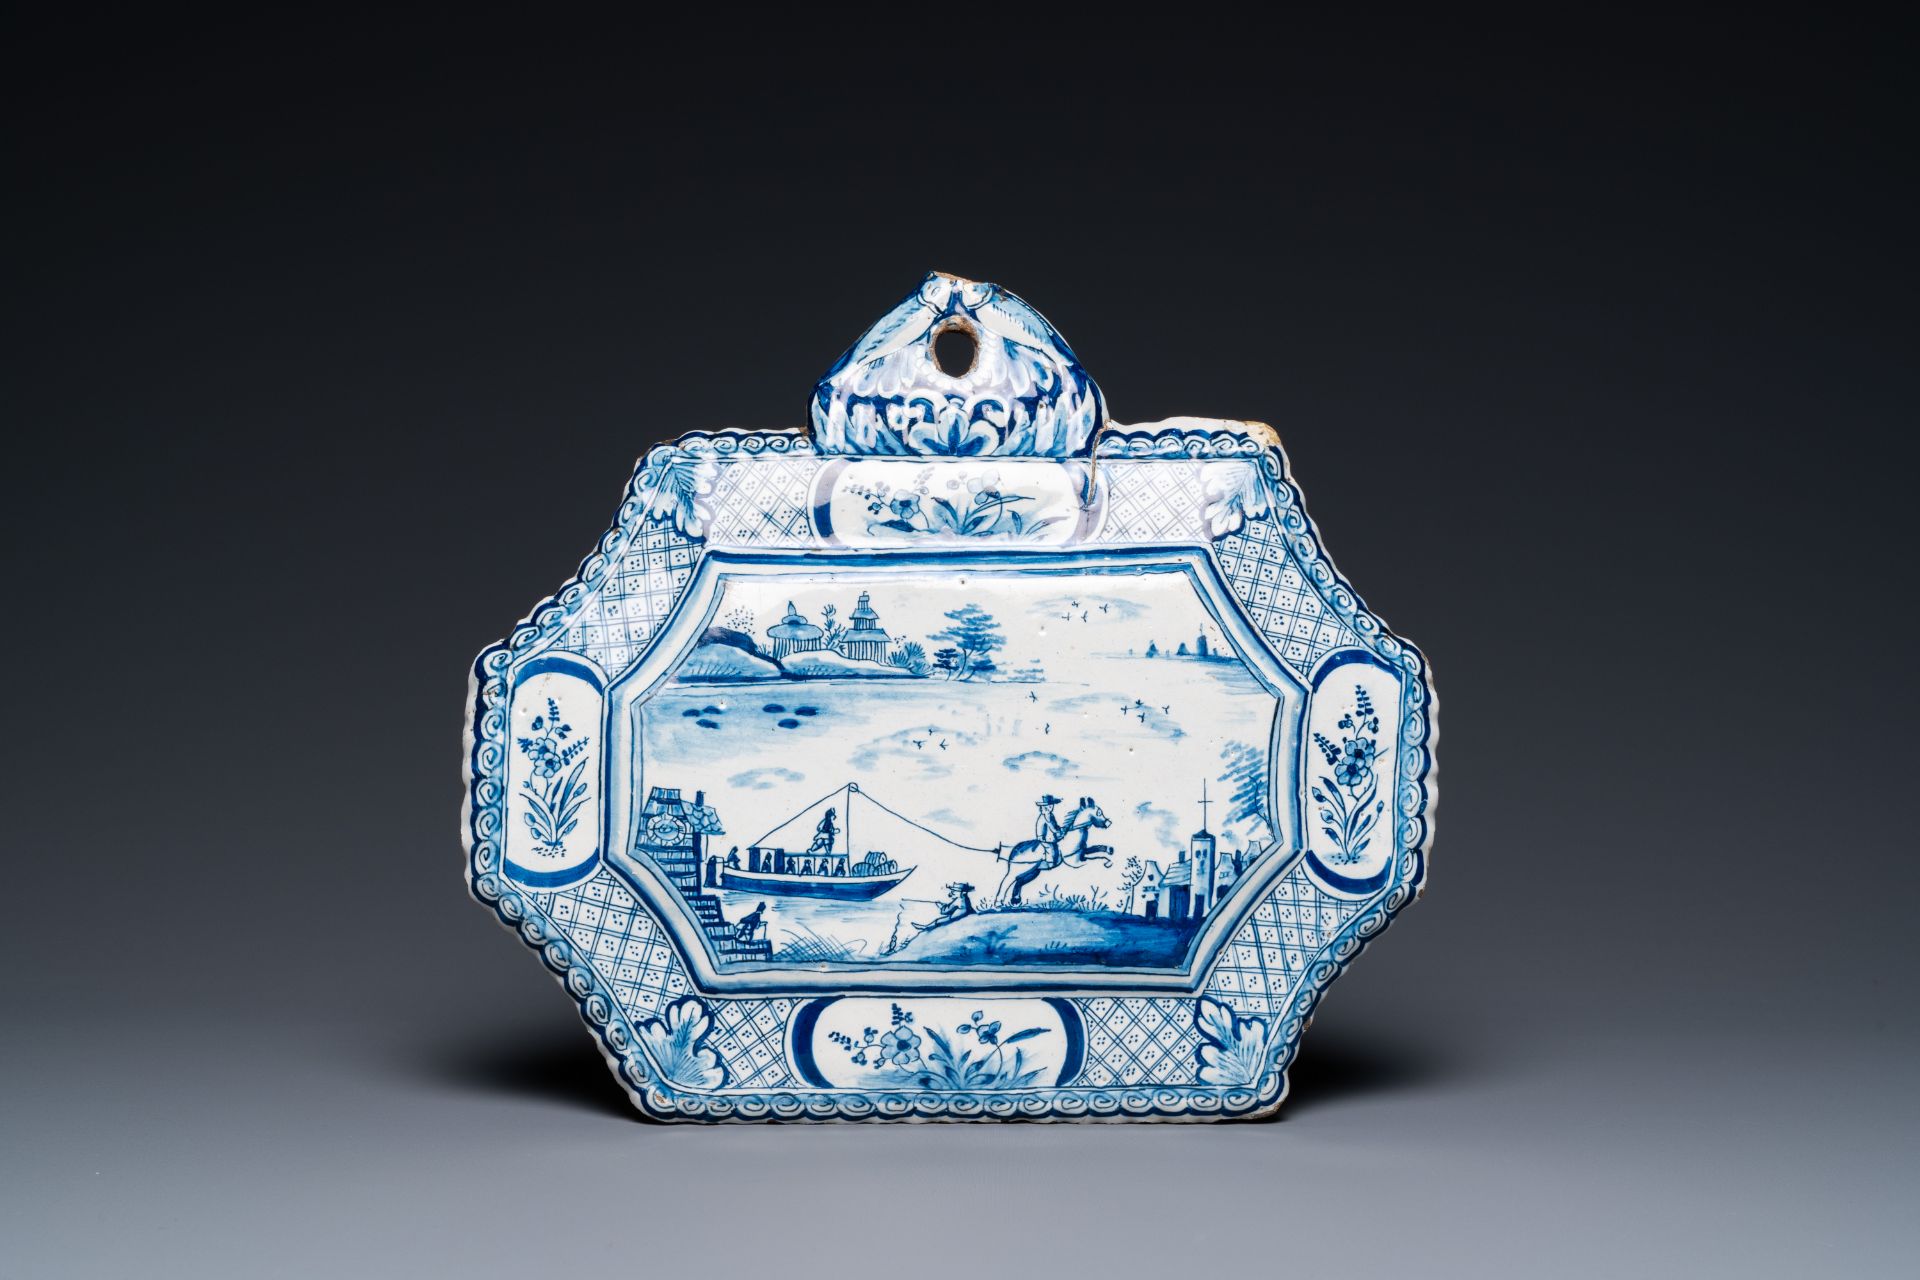 A Dutch Delft blue and white plaque depicting a horse-drawn boat, 18th C.